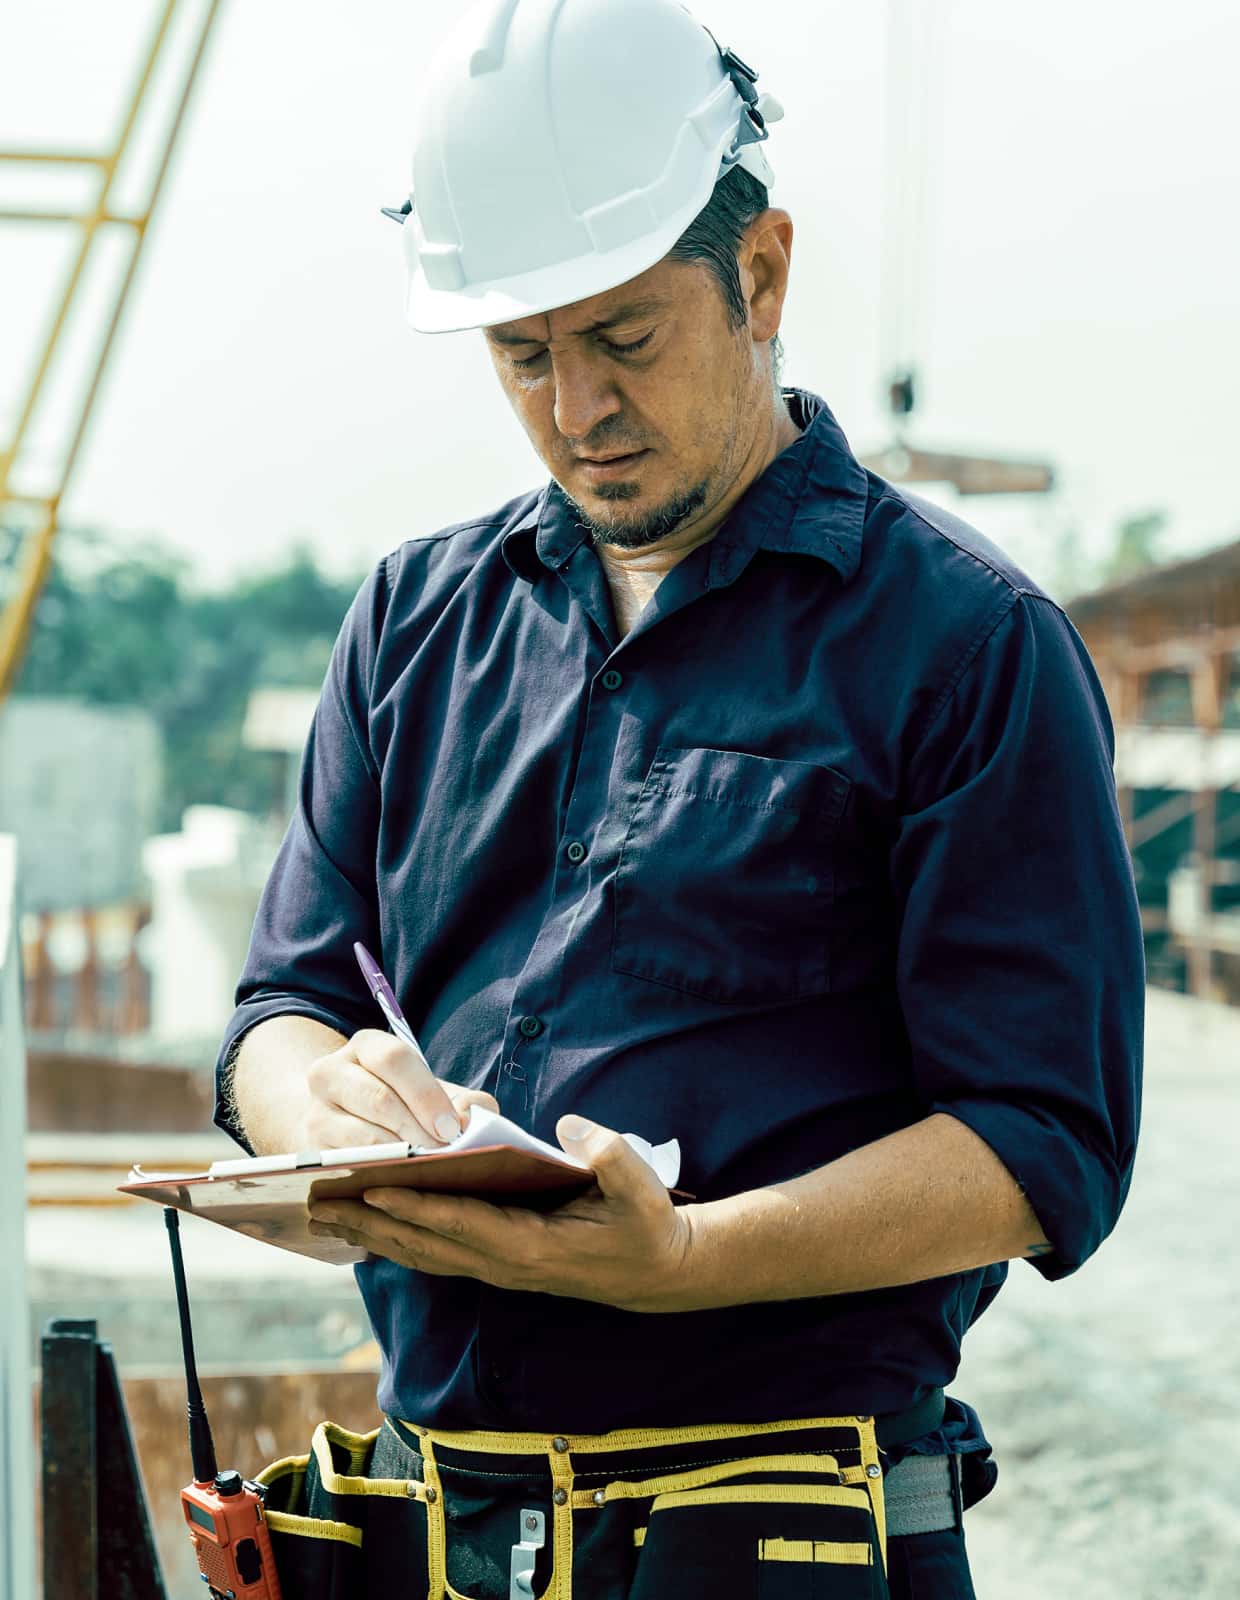 A man in a hard hat writes something on a clipboard at a construction site.